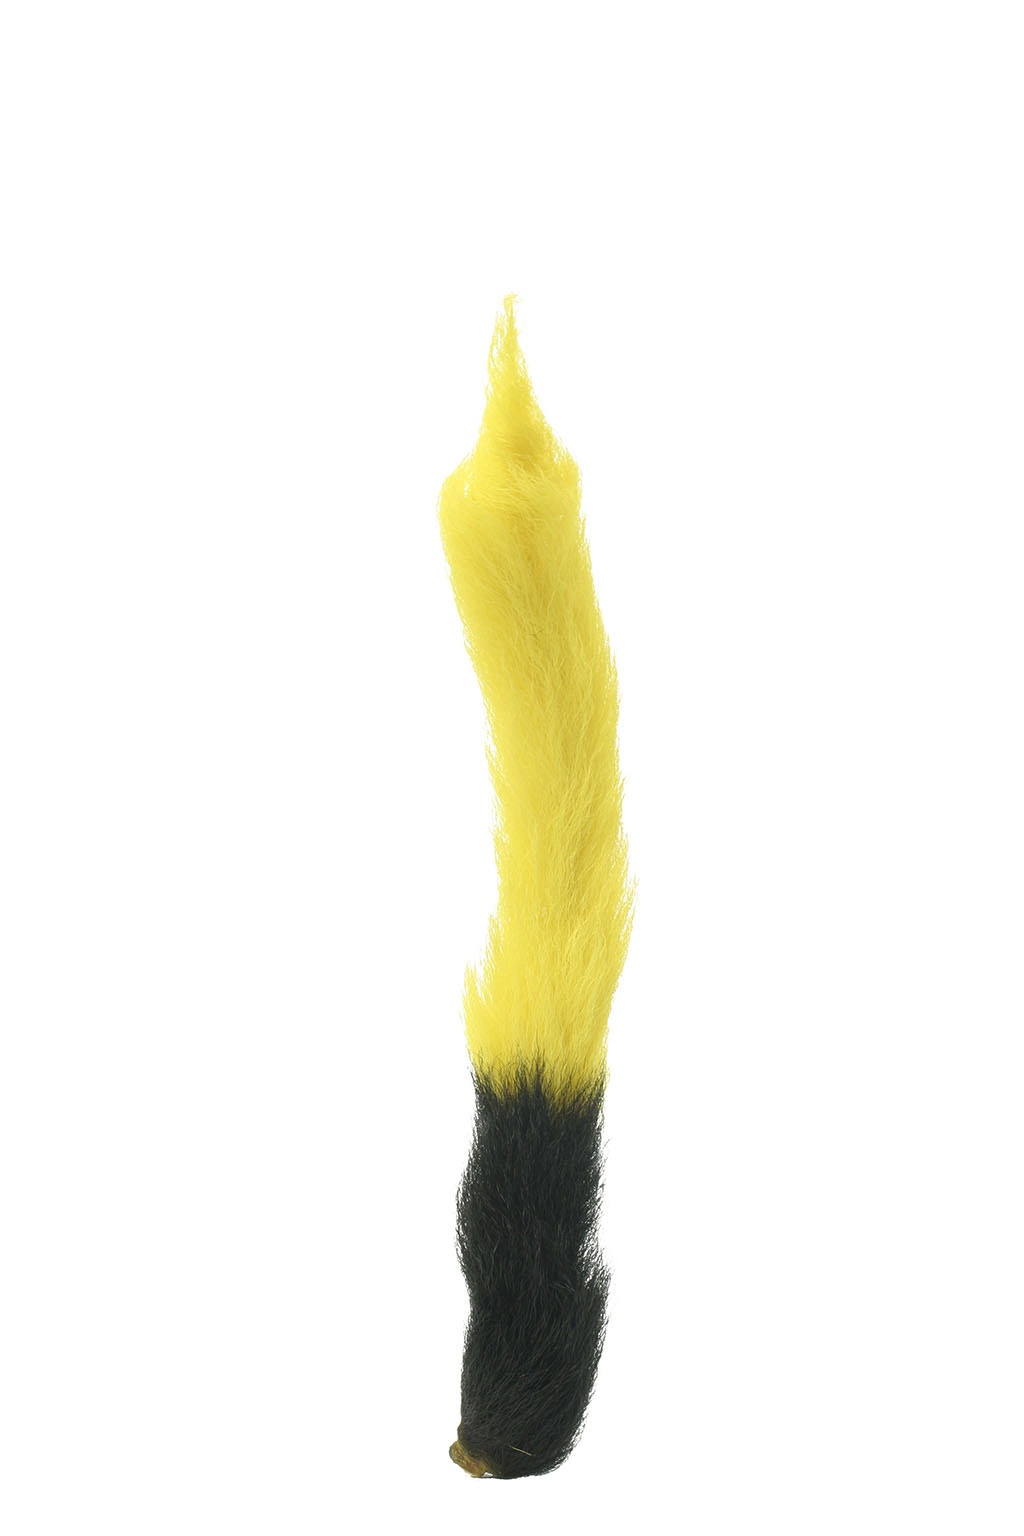 Calf Tails-Assorted Tails 8-10 Inch - Lemon Yellow